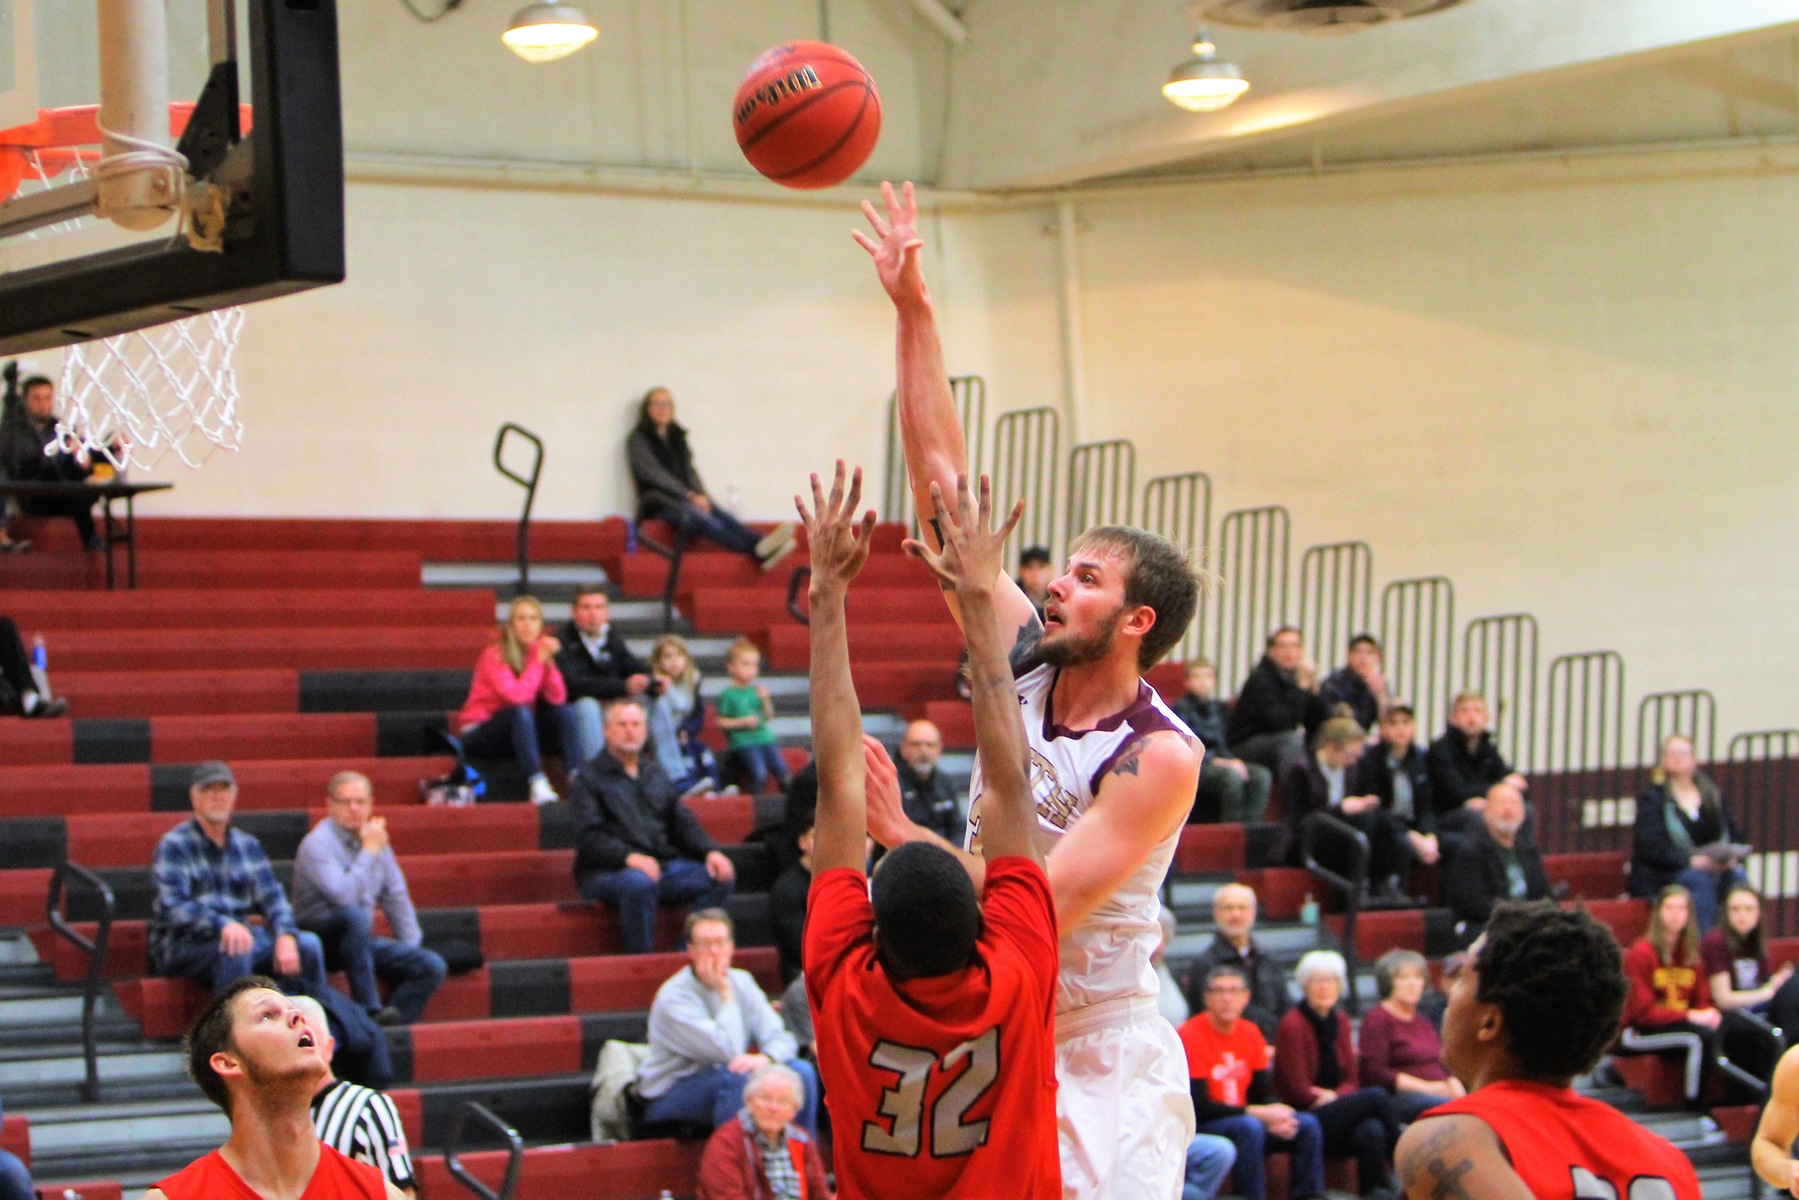 Tanner Van Beek's season-high 25 points were not enough in a one-point loss to Barclay